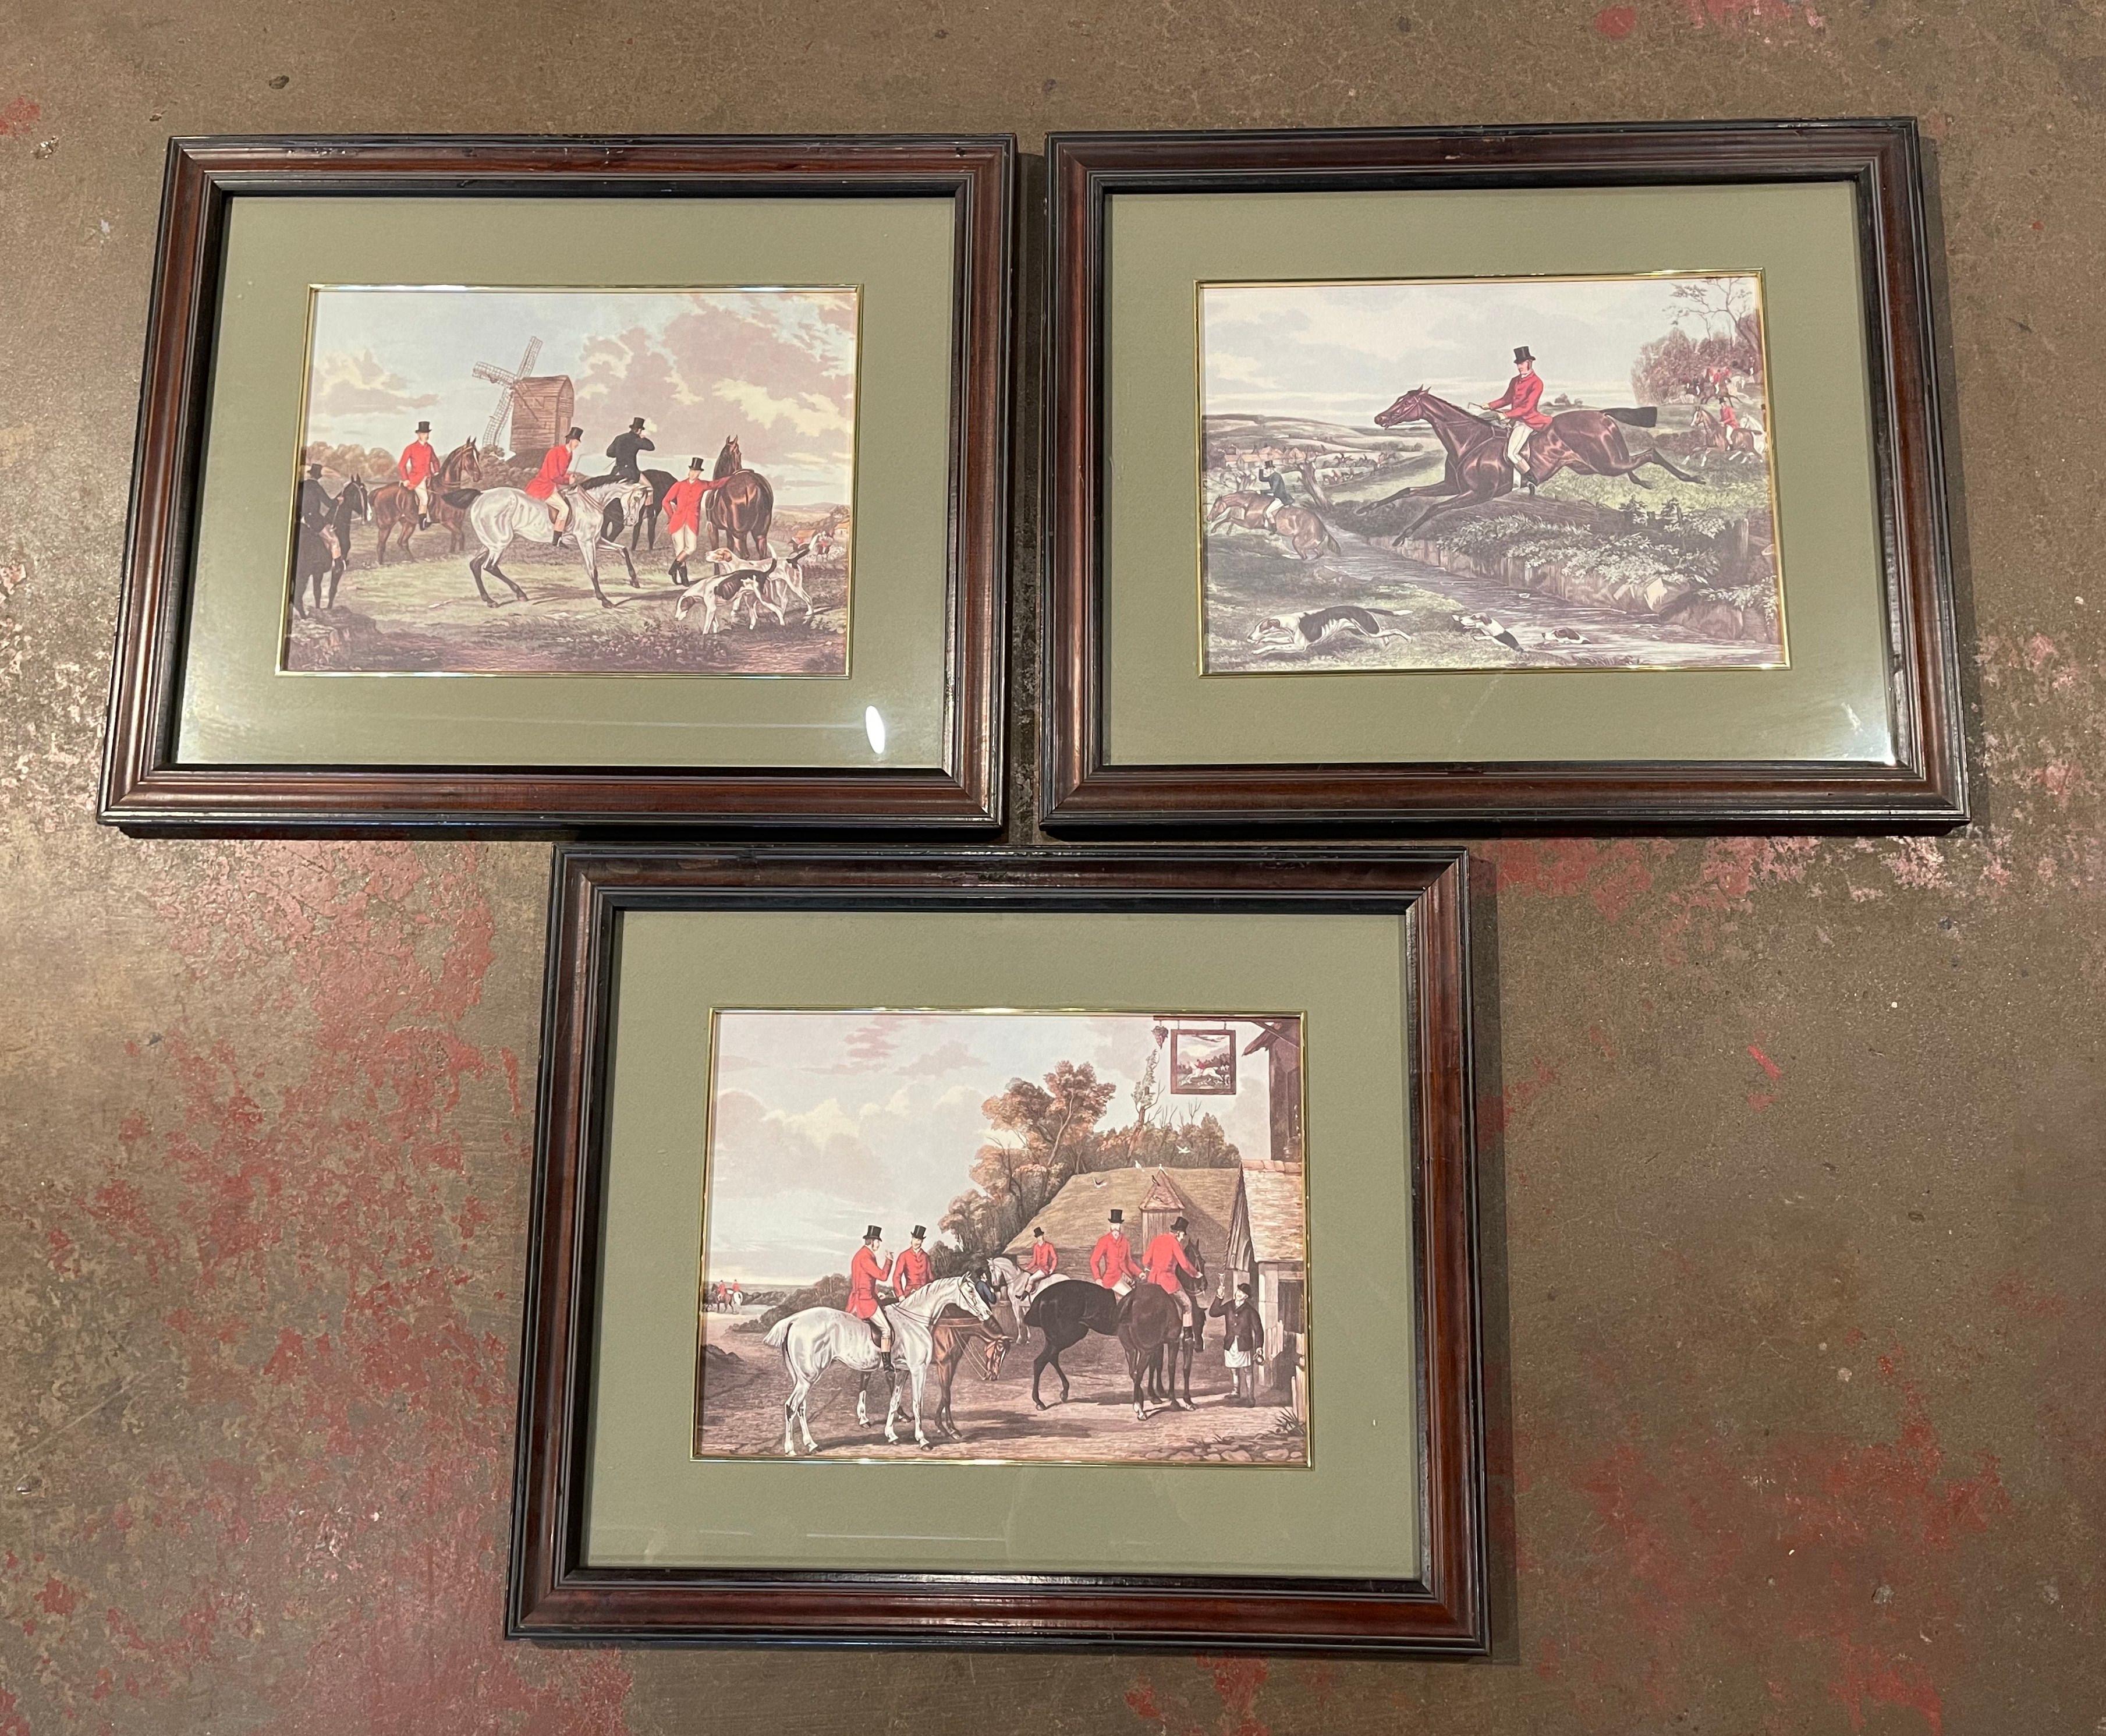 Early 20th Century French Framed Watercolor Hunt Scene Prints, Set of Three In Excellent Condition For Sale In Dallas, TX